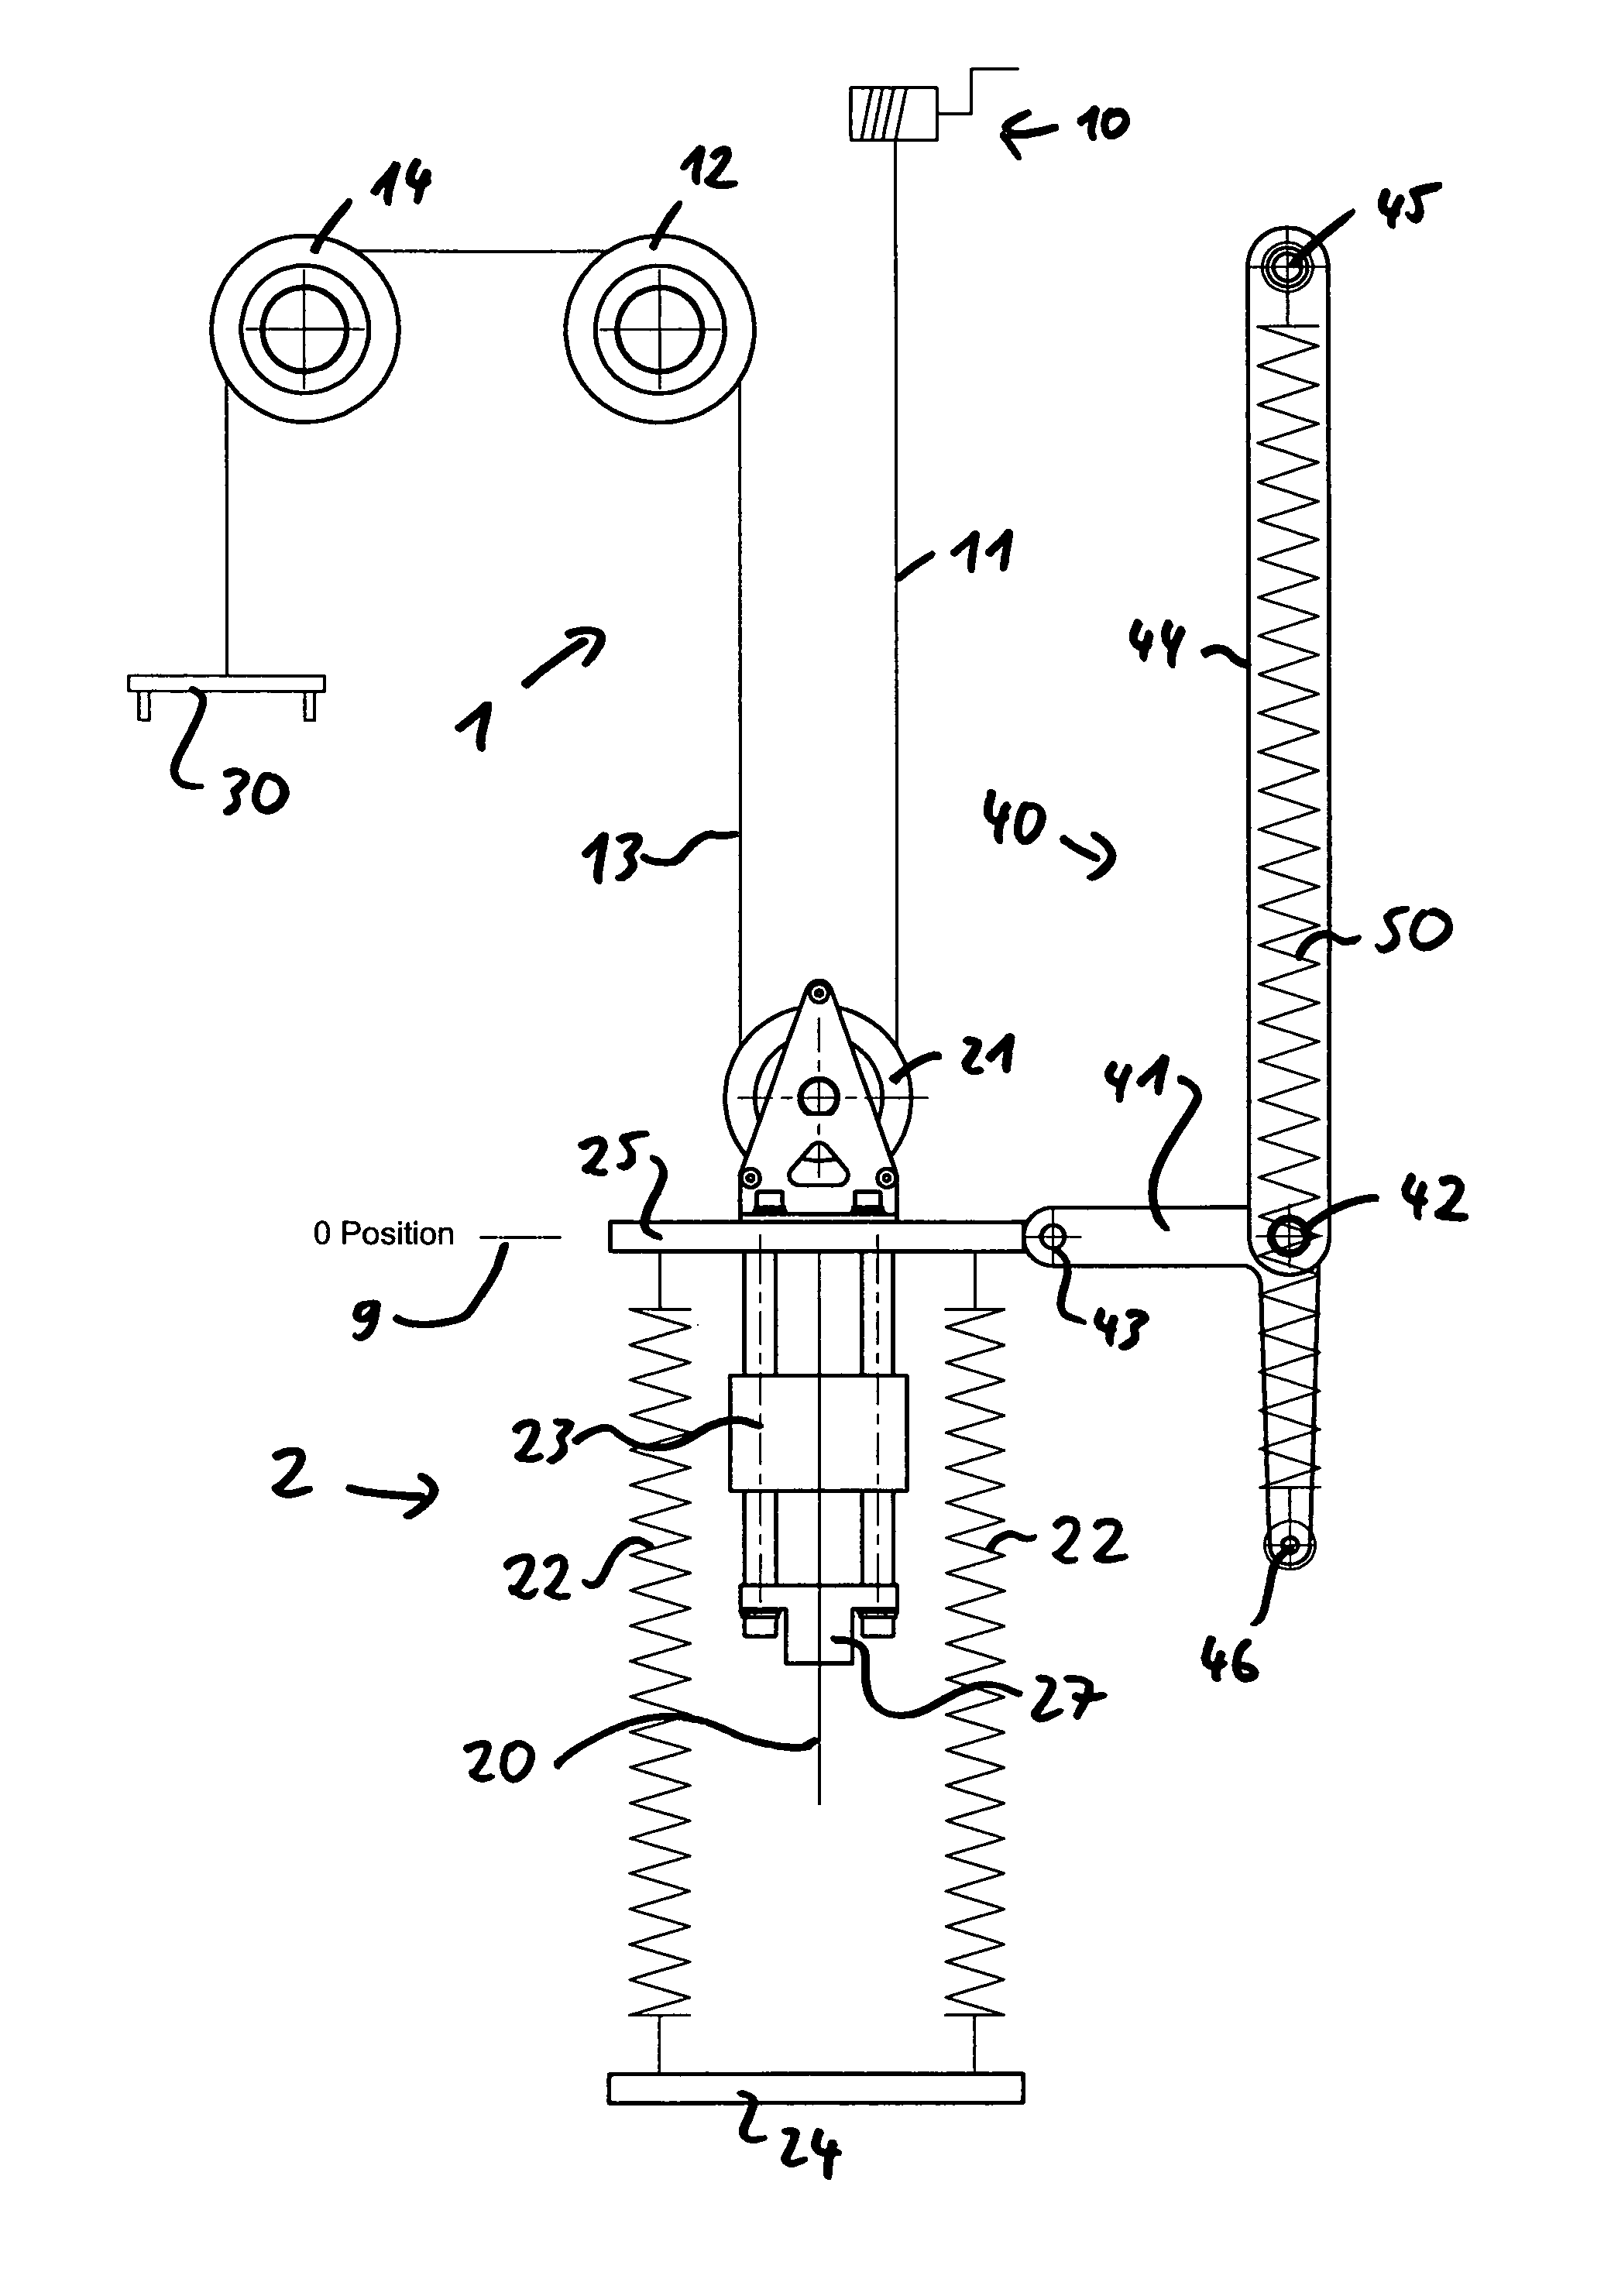 Device for adjusting the prestress of an elastic means around a predetermined tension or position